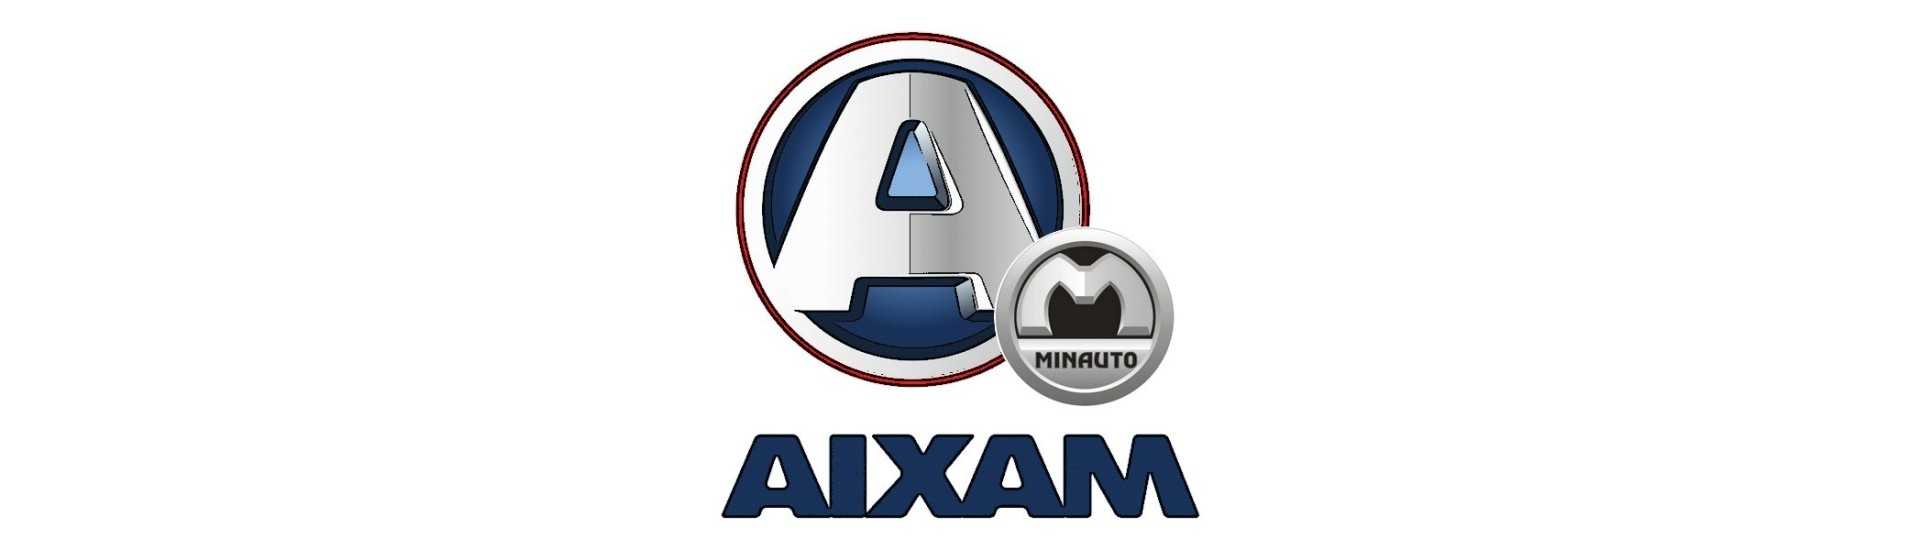 Hand brake cable best price car without license Aixam Minauto